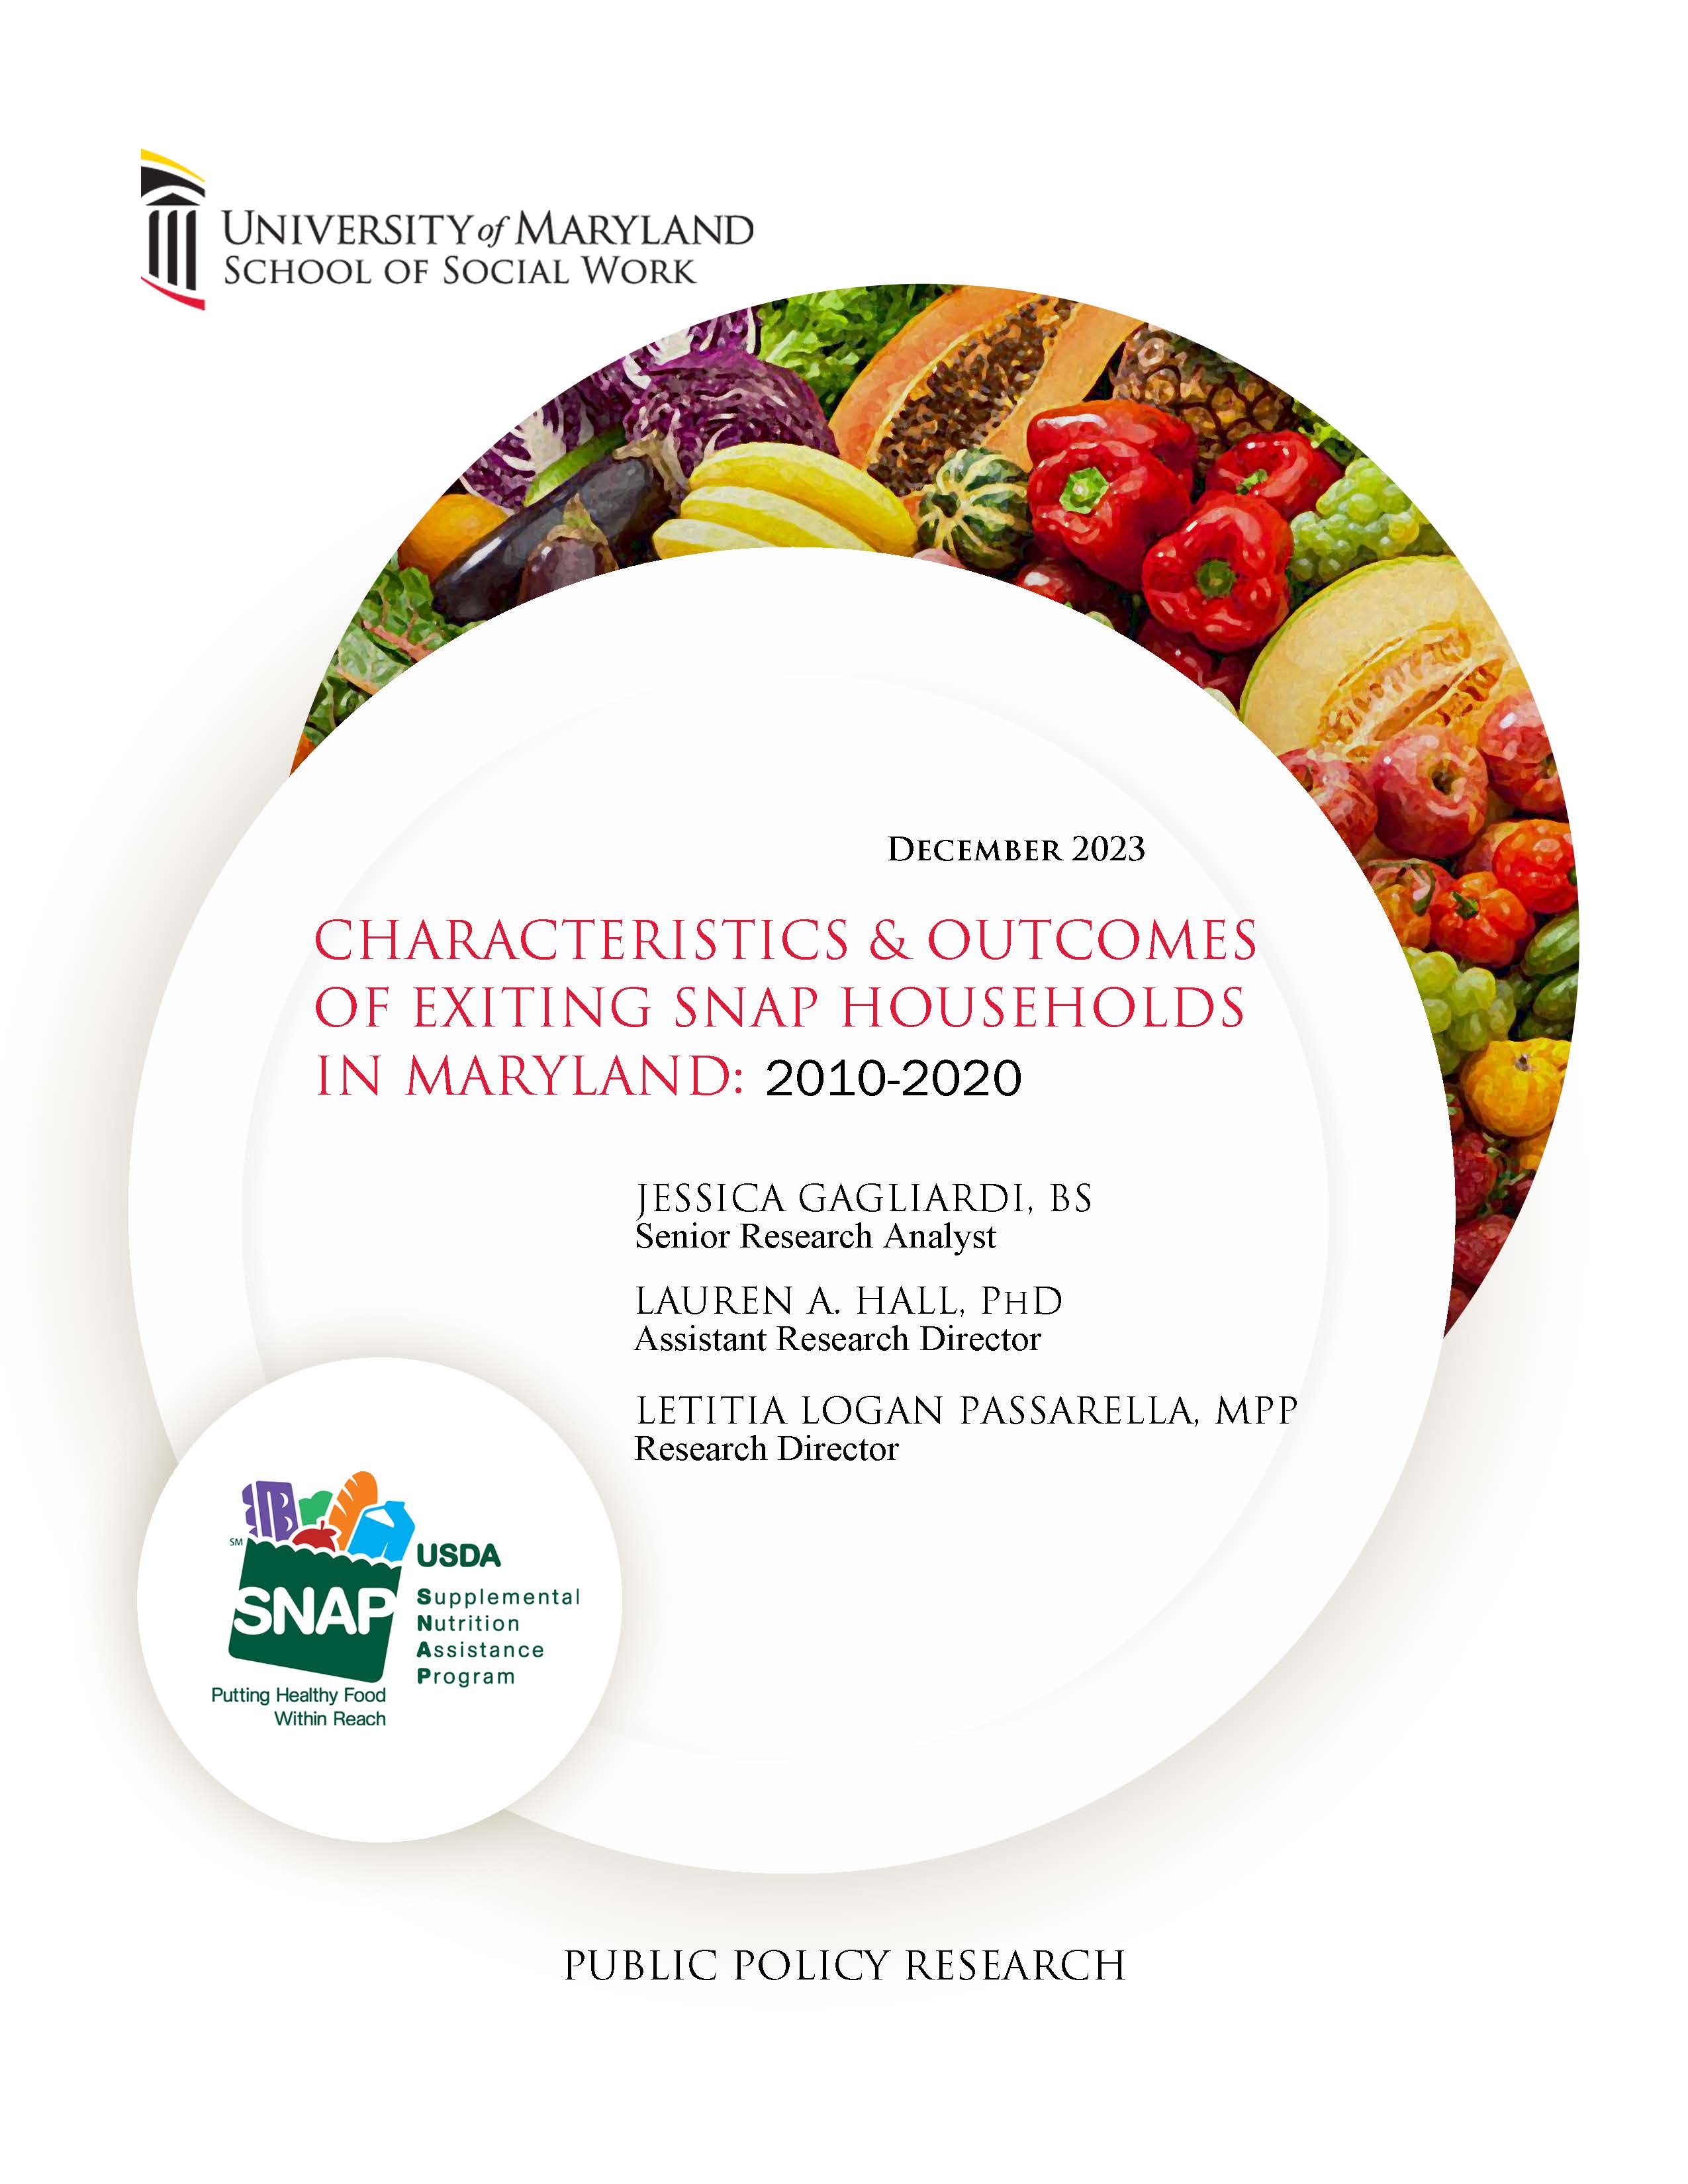 Characteristics & Outcomes of Exiting SNAP Households in Maryland: 2010-2020